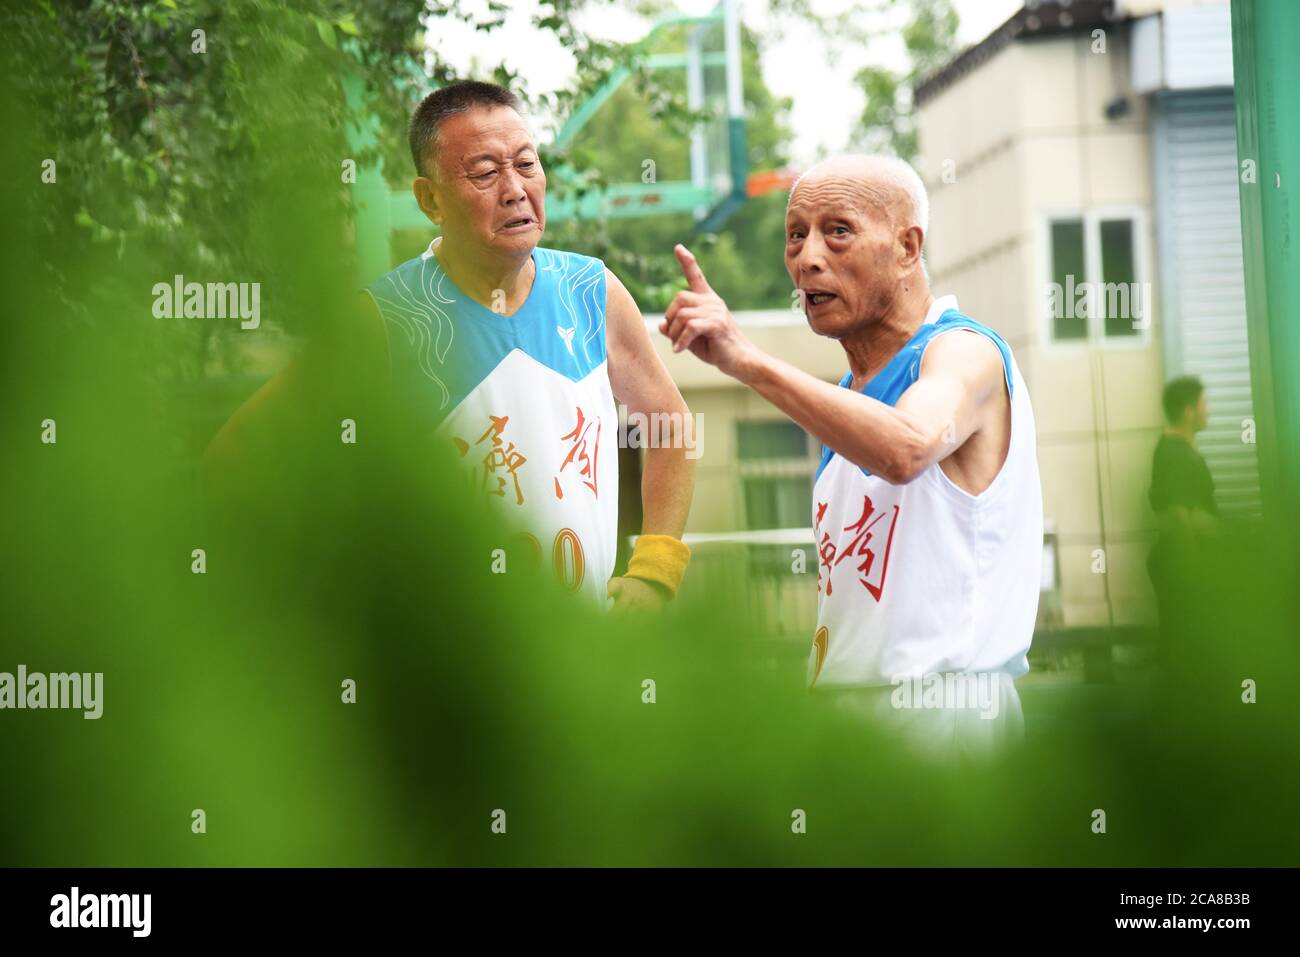 (200805) -- JINAN, Aug. 5, 2020 (Xinhua) -- Li Chunfu (C), 92, talks to his teammate during a training break at an outdoor basketball court in Jinan, east China's Shandong Province, Aug. 5, 2020. As the oldest member of Jinan Senior Basketball Team which was founded in 2012, Li Chunfu has been playing basketball in his daily routine since 1949. Now in his 90s, Li practises basketball skills such as dribbling, layuping and shooting for half an hour to fourty minutes on average a day. 'Fitness requires consistency and regularity. Playing basketball and weight training make me maintain a good phy Stock Photo